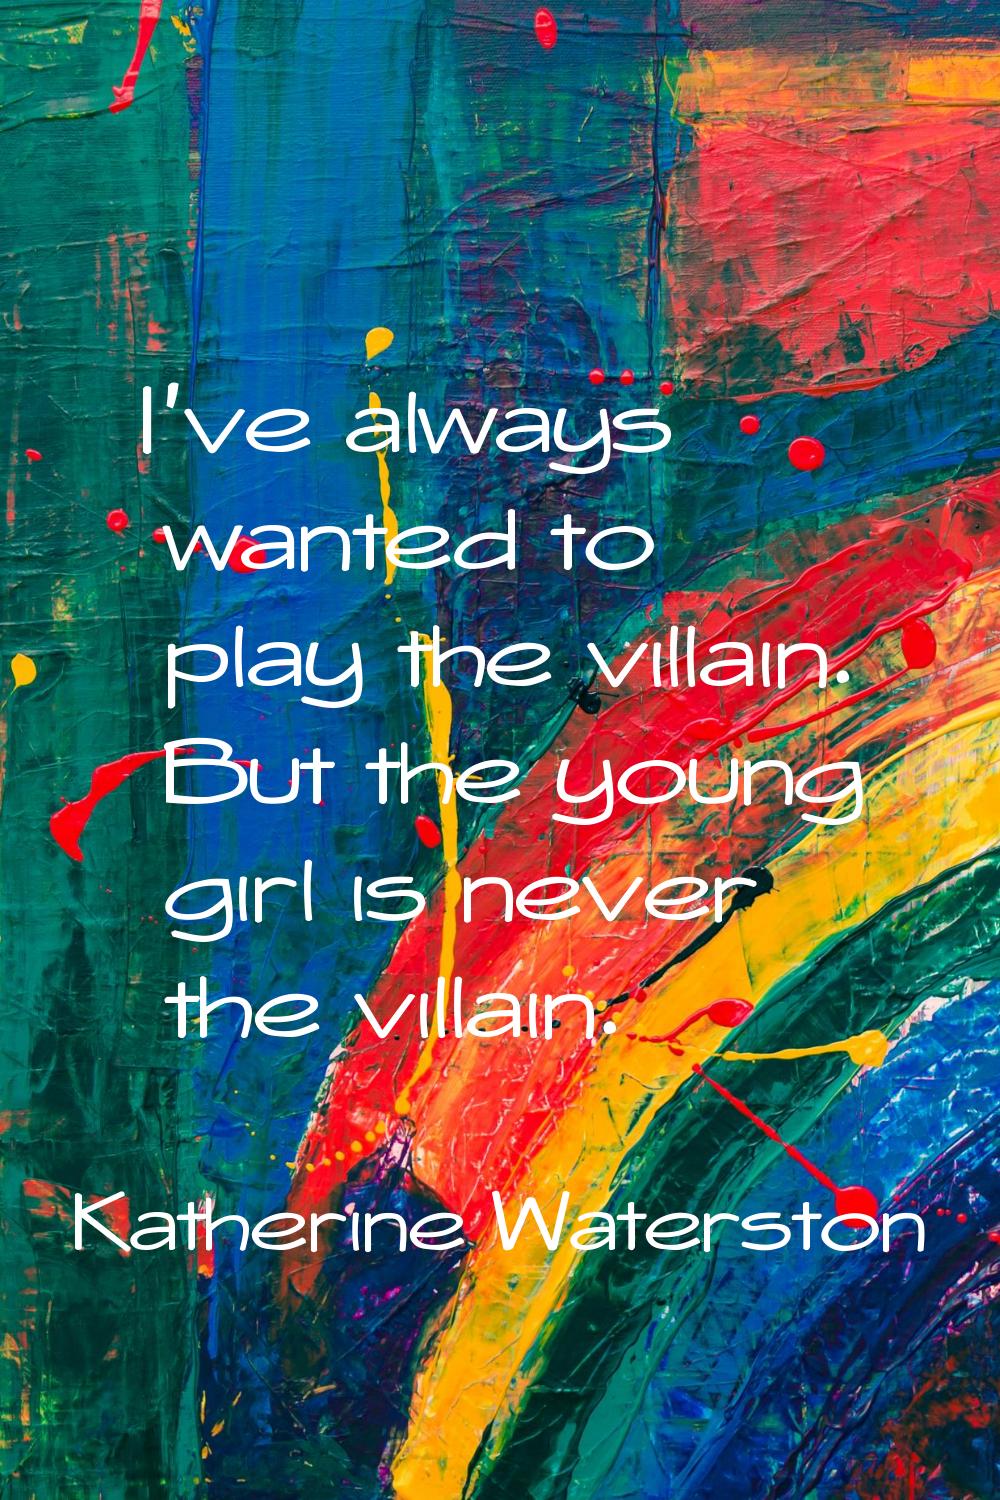 I've always wanted to play the villain. But the young girl is never the villain.